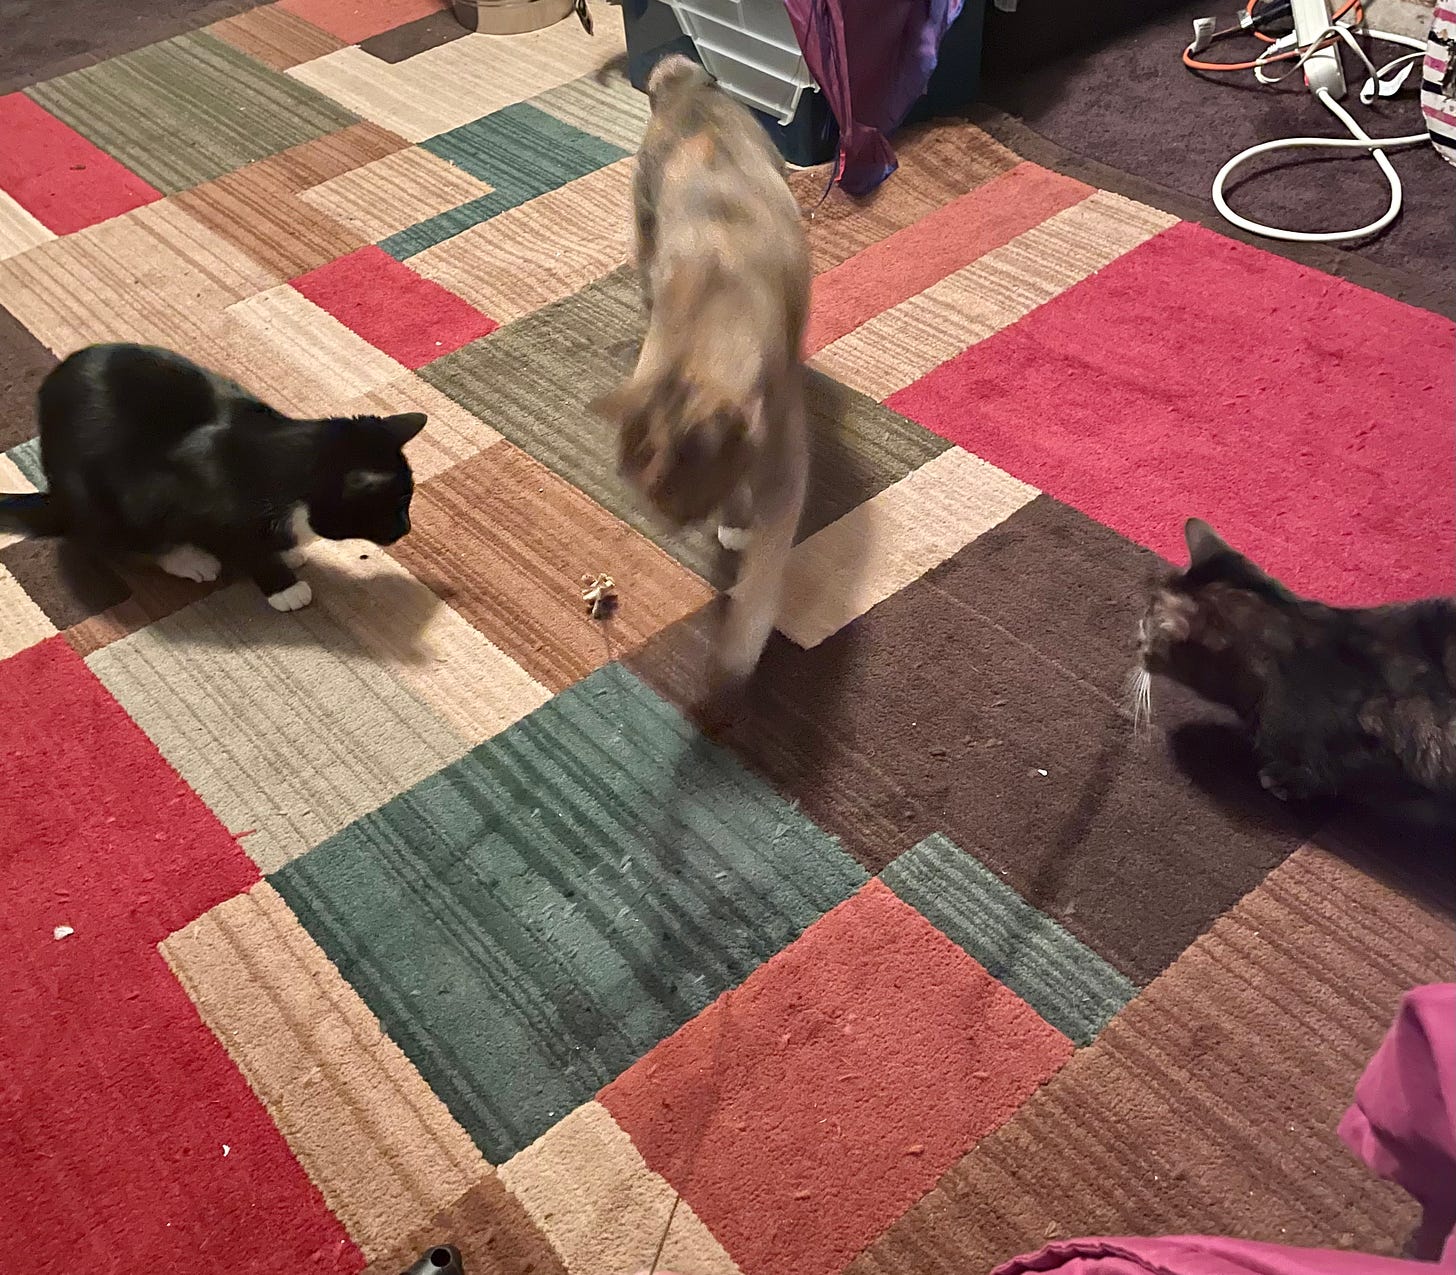 Three cats look at a wire and cardboard toy. They are a tuxedo, a dilute calico manx, and a calico. 